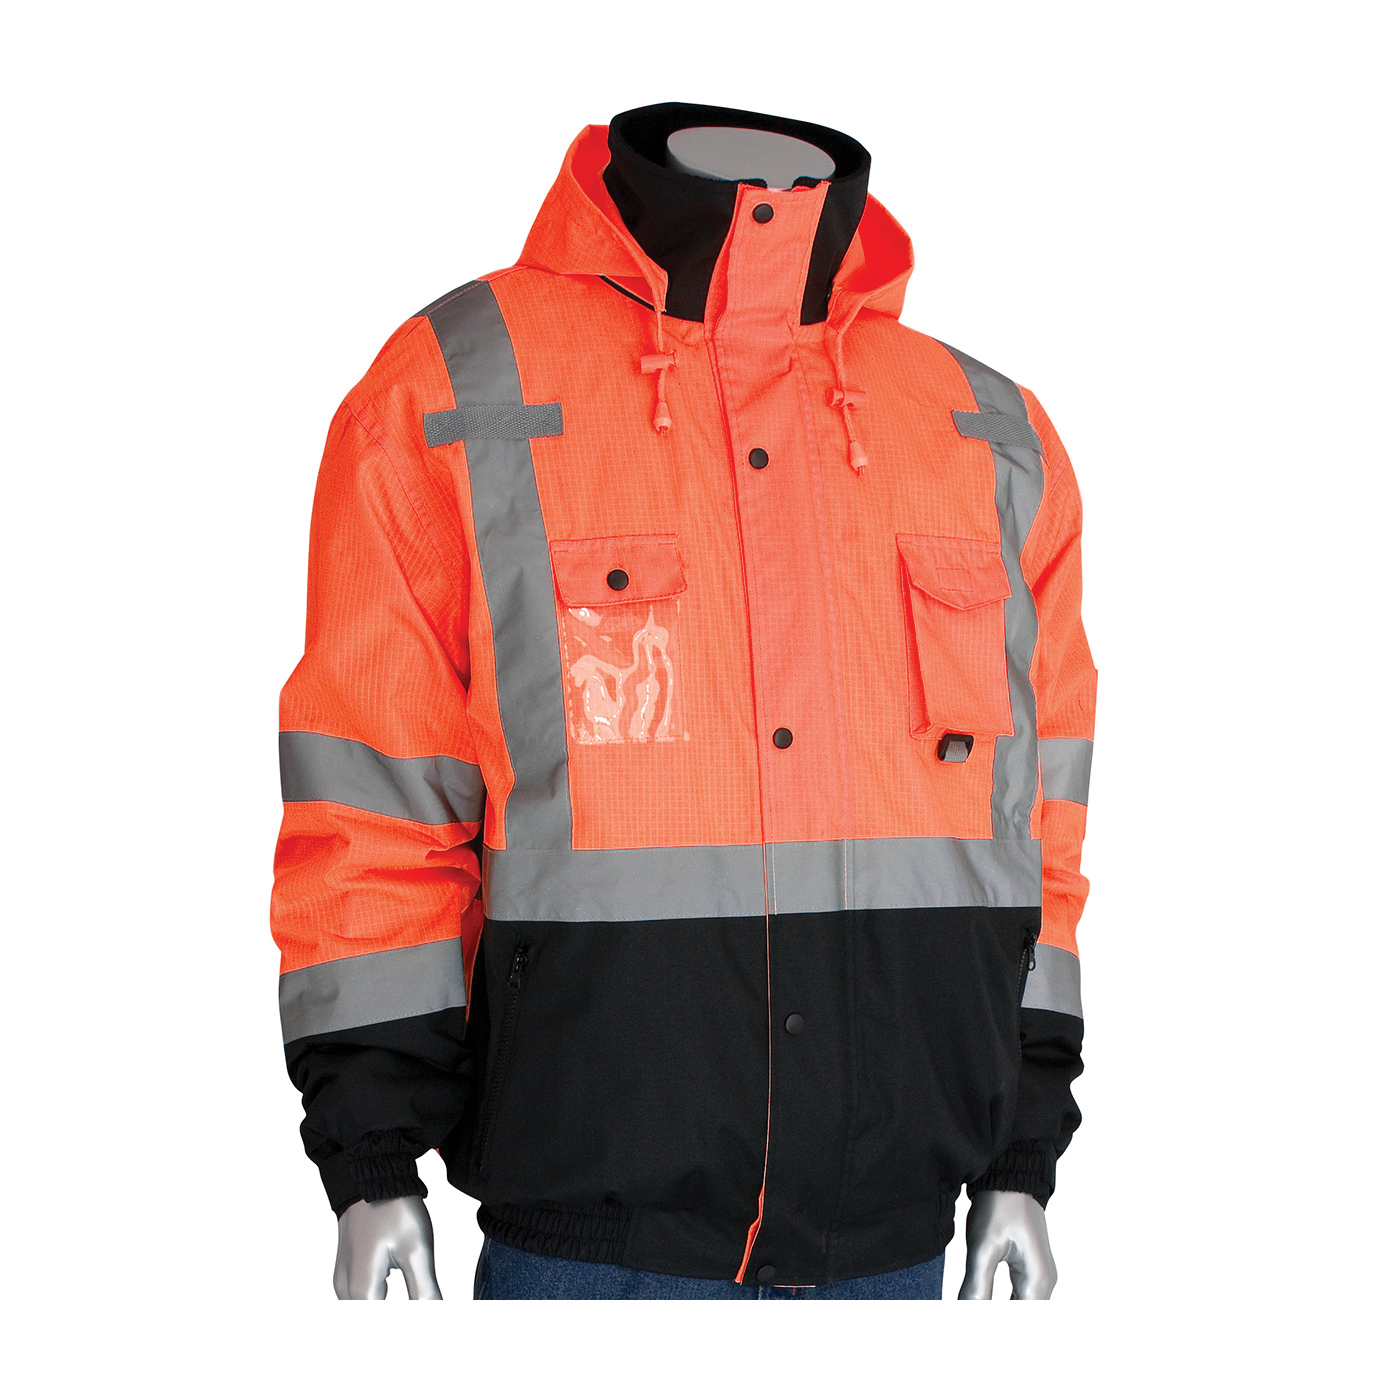 PIP® 333-1770-OR/2X Bomber Jacket With Zip-Out Fleece Liner, Hi-Viz Orange, Polyester, 63 in Chest, Resists: Water, Specifications Met: ANSI 107 Class 3 Type R